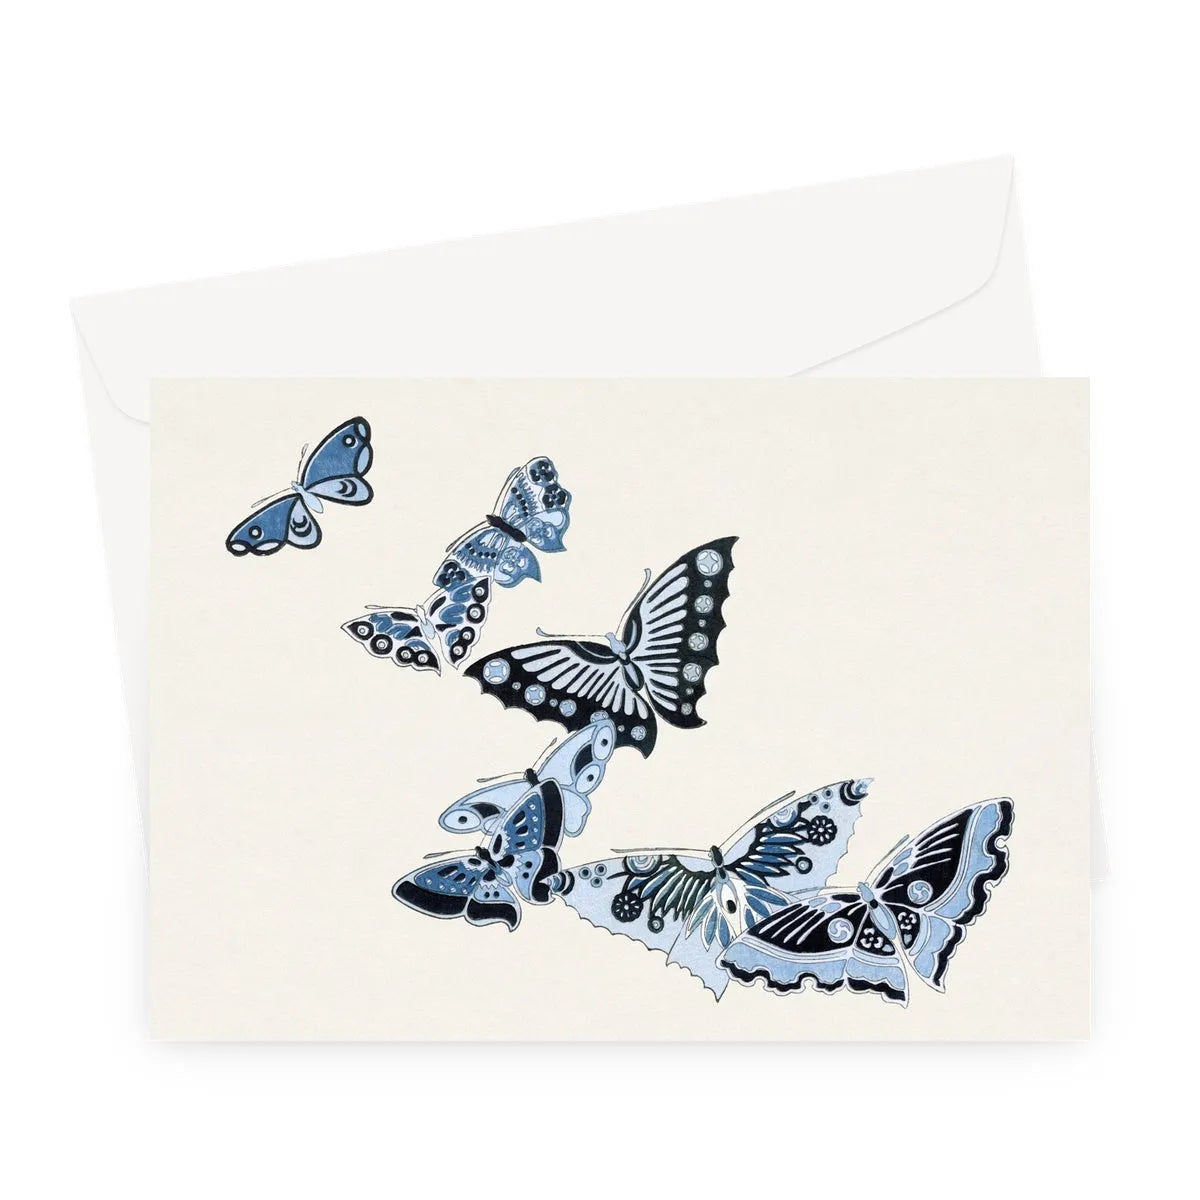 Japanese Butterflies In Blue By Kamisaka Sekka Greeting Card - A5 Landscape / 1 Card - Greeting & Note Cards